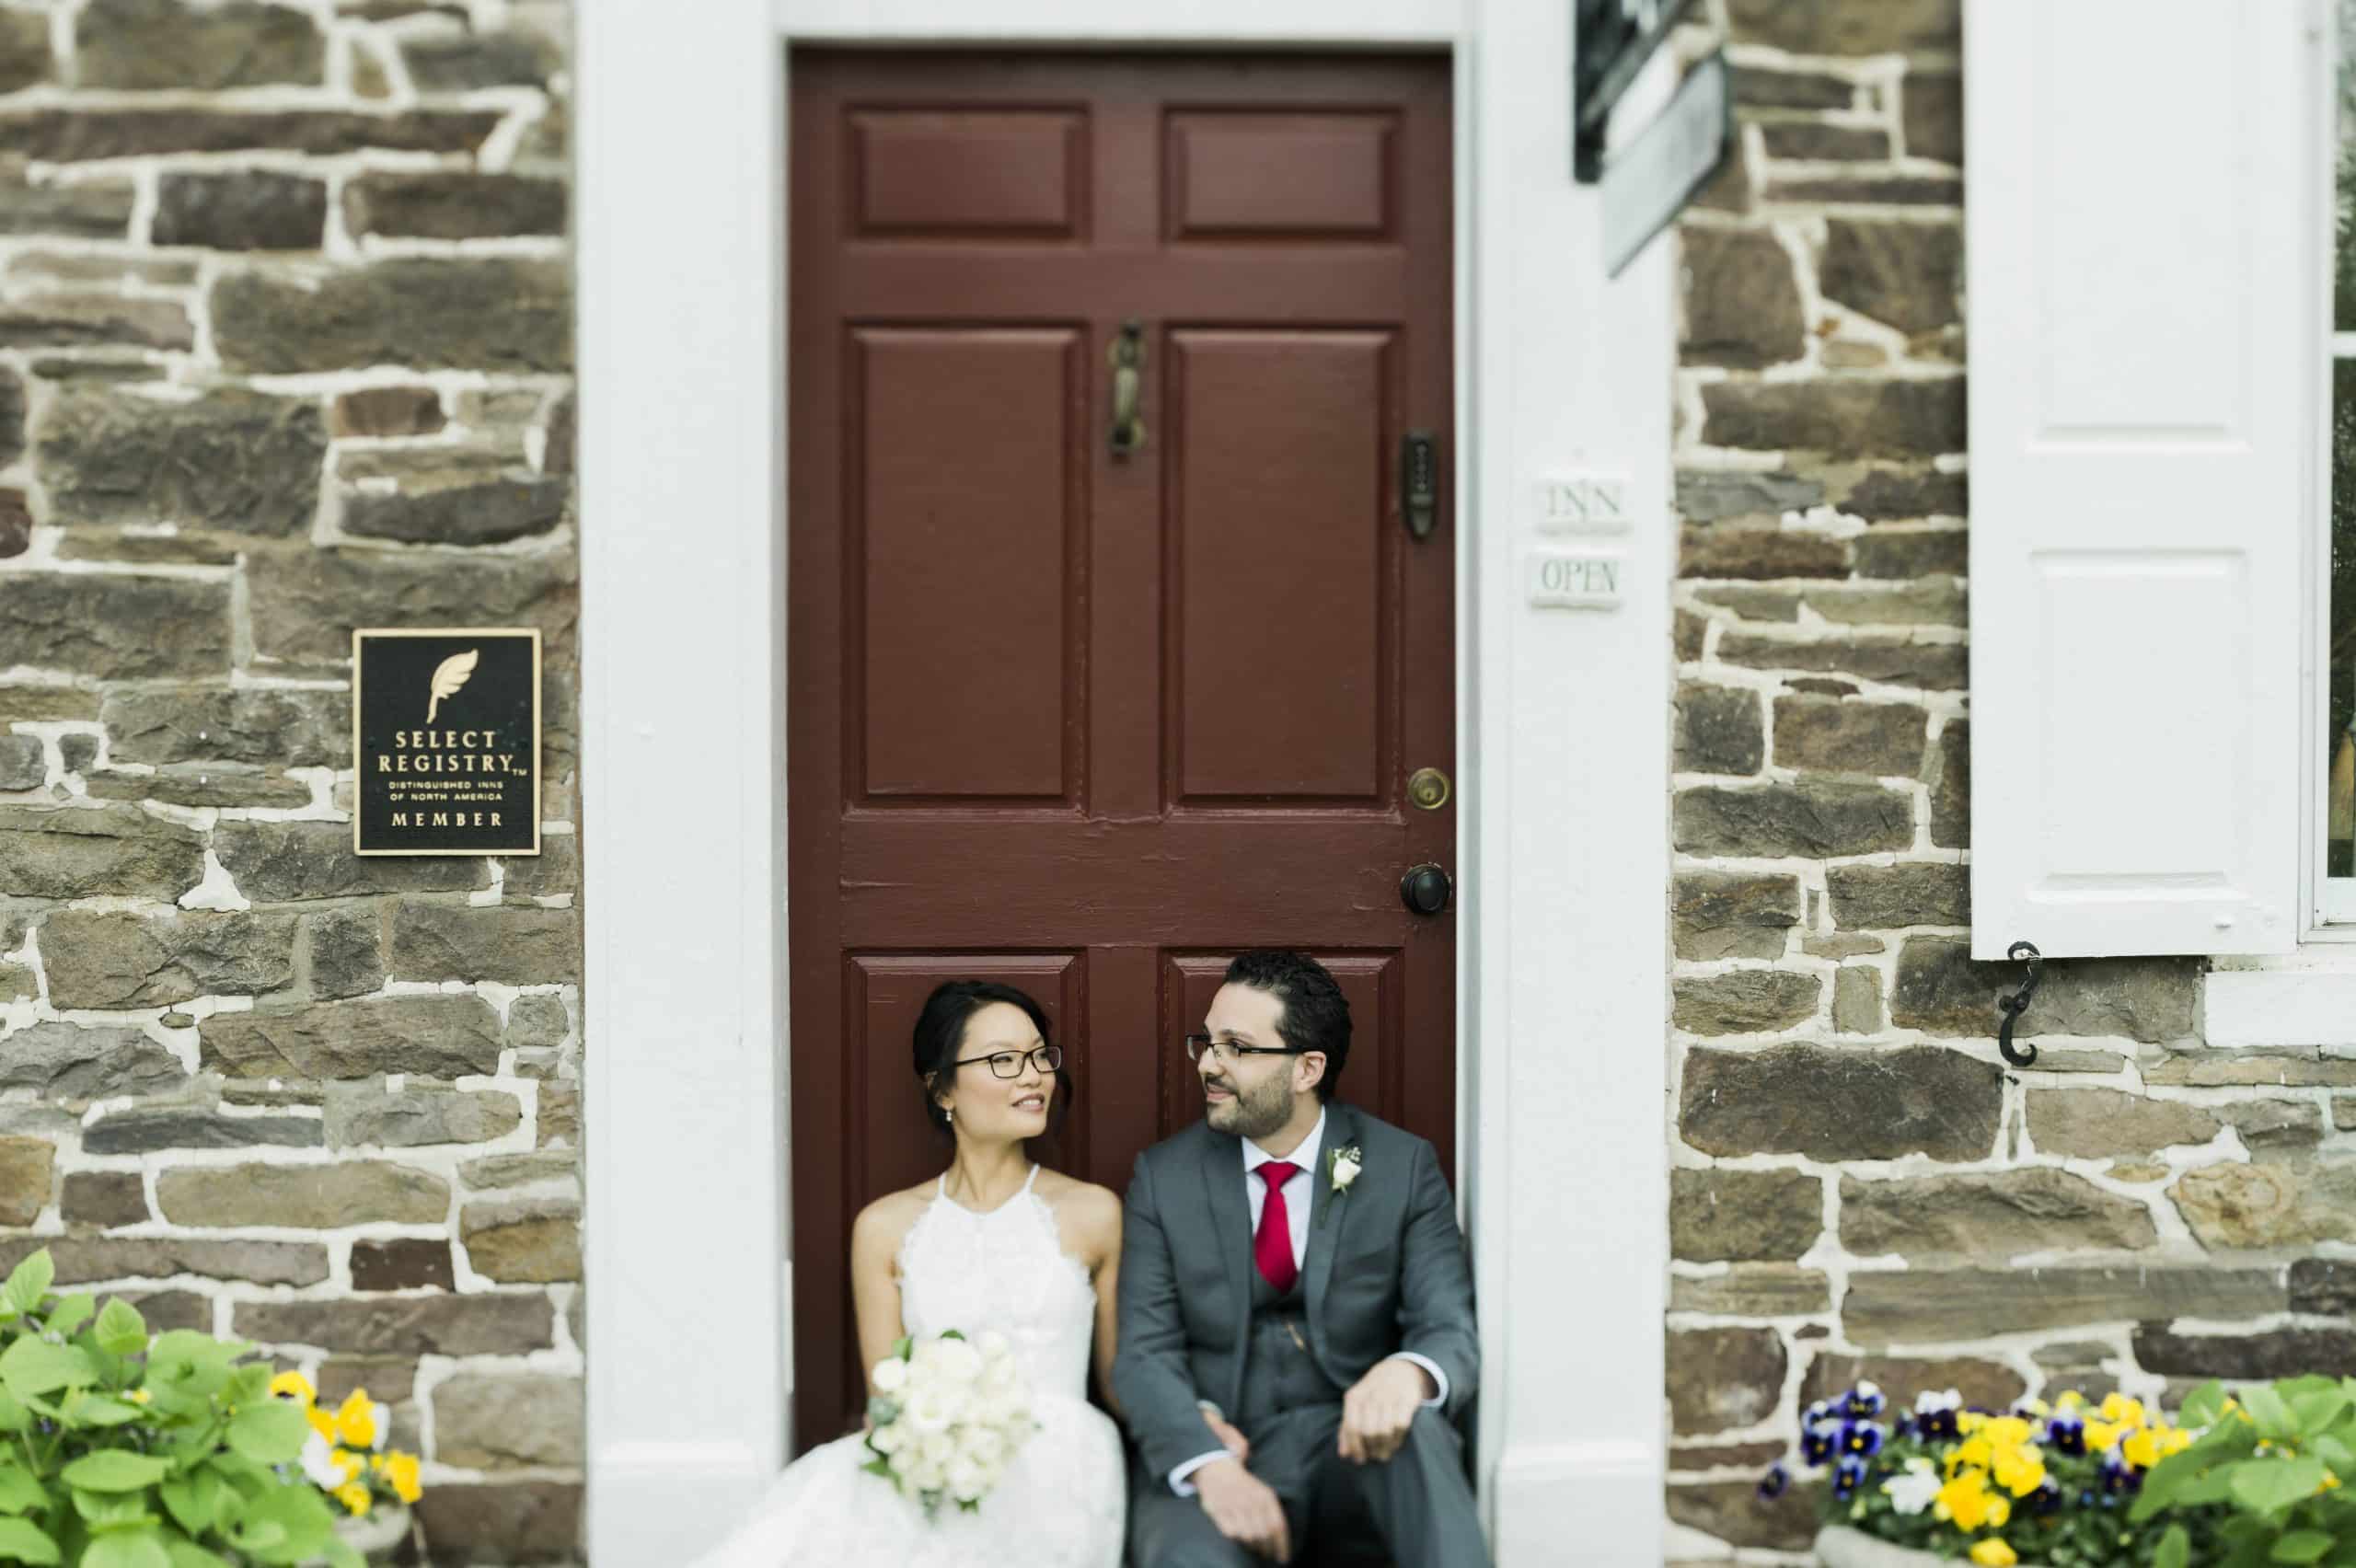 Jessica & Cory's rustic NJ wedding at the Woolverton Inn, captured by fun, candid, photojournalistic wedding photographer Ben Lau.